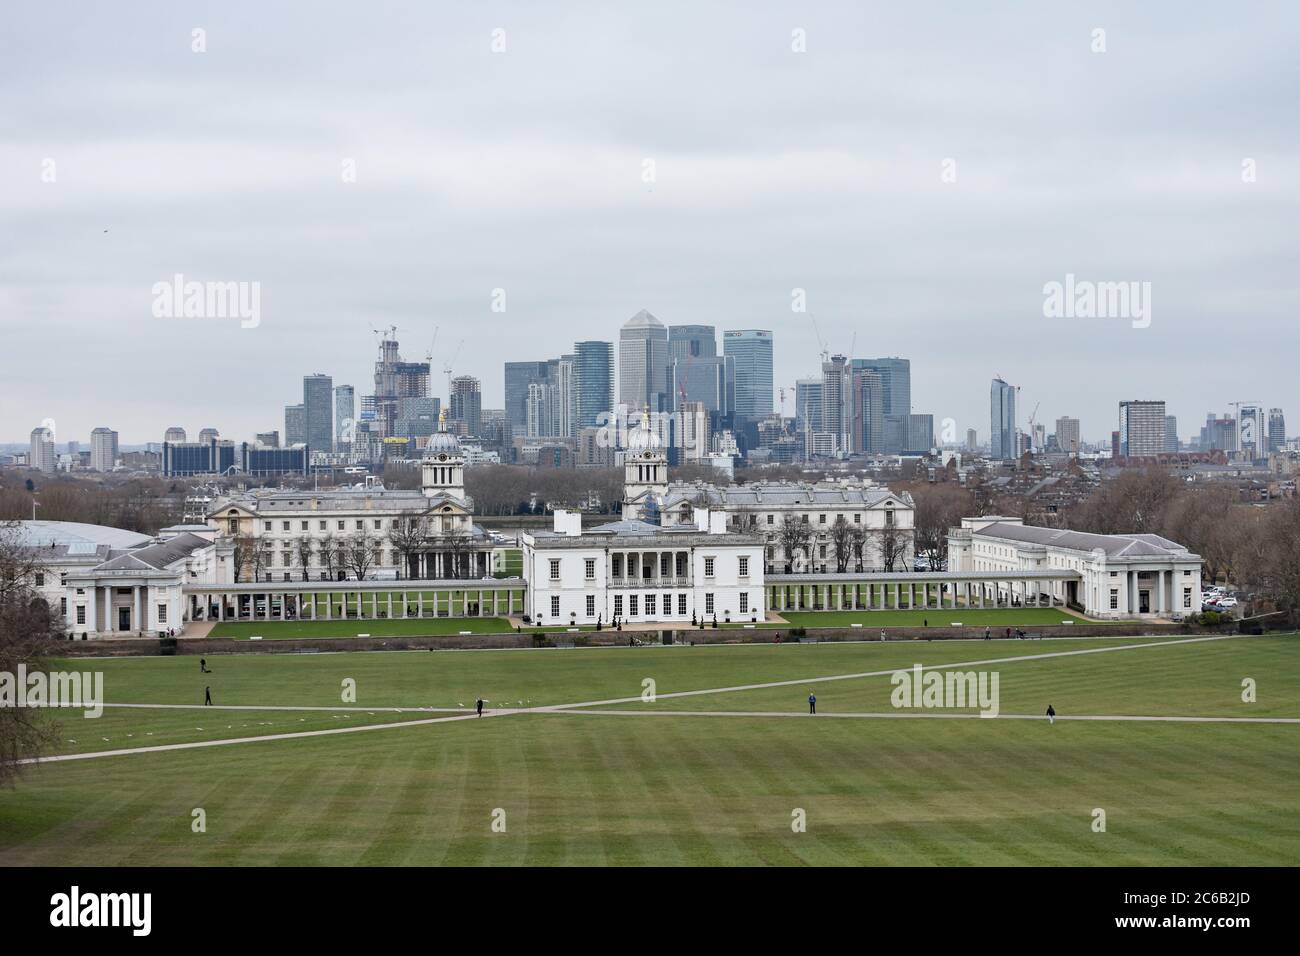 The Old Royal Navy College and Queens House from the hill in Greenwich Park.  Canary Wharf business district is seen behind, across the River Thames. Stock Photo